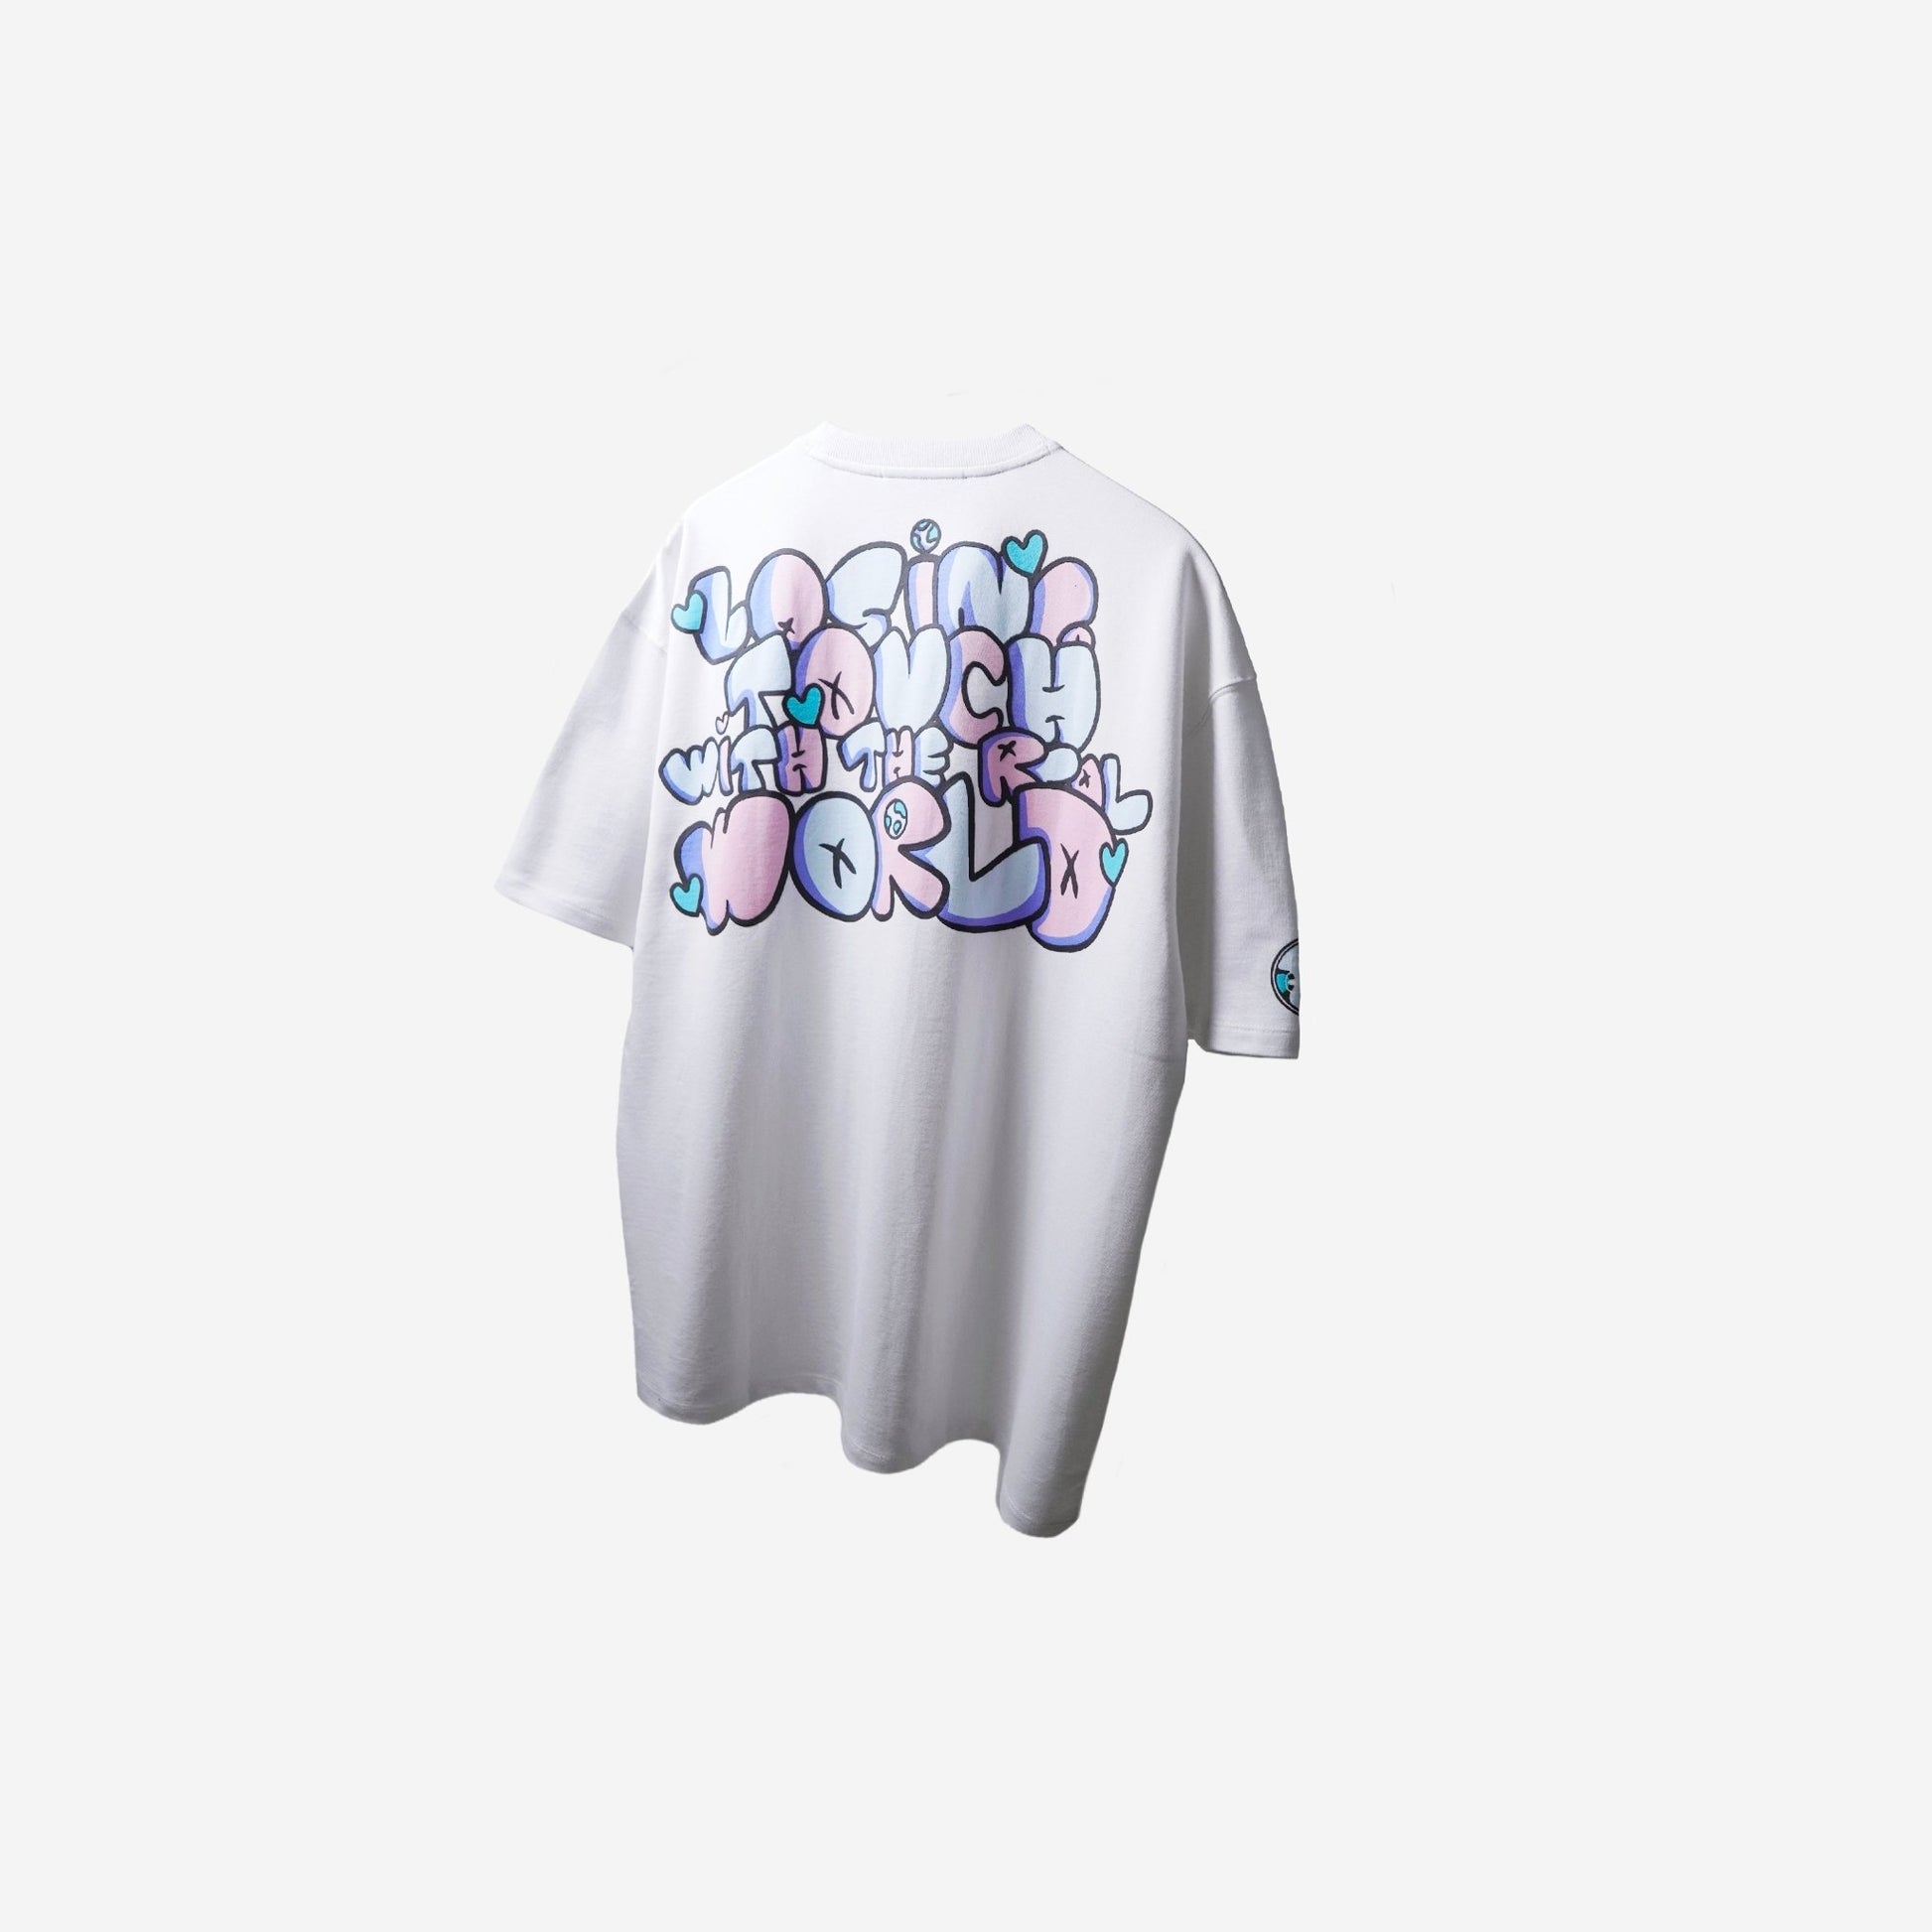 UNREAL tee white - Bluorng